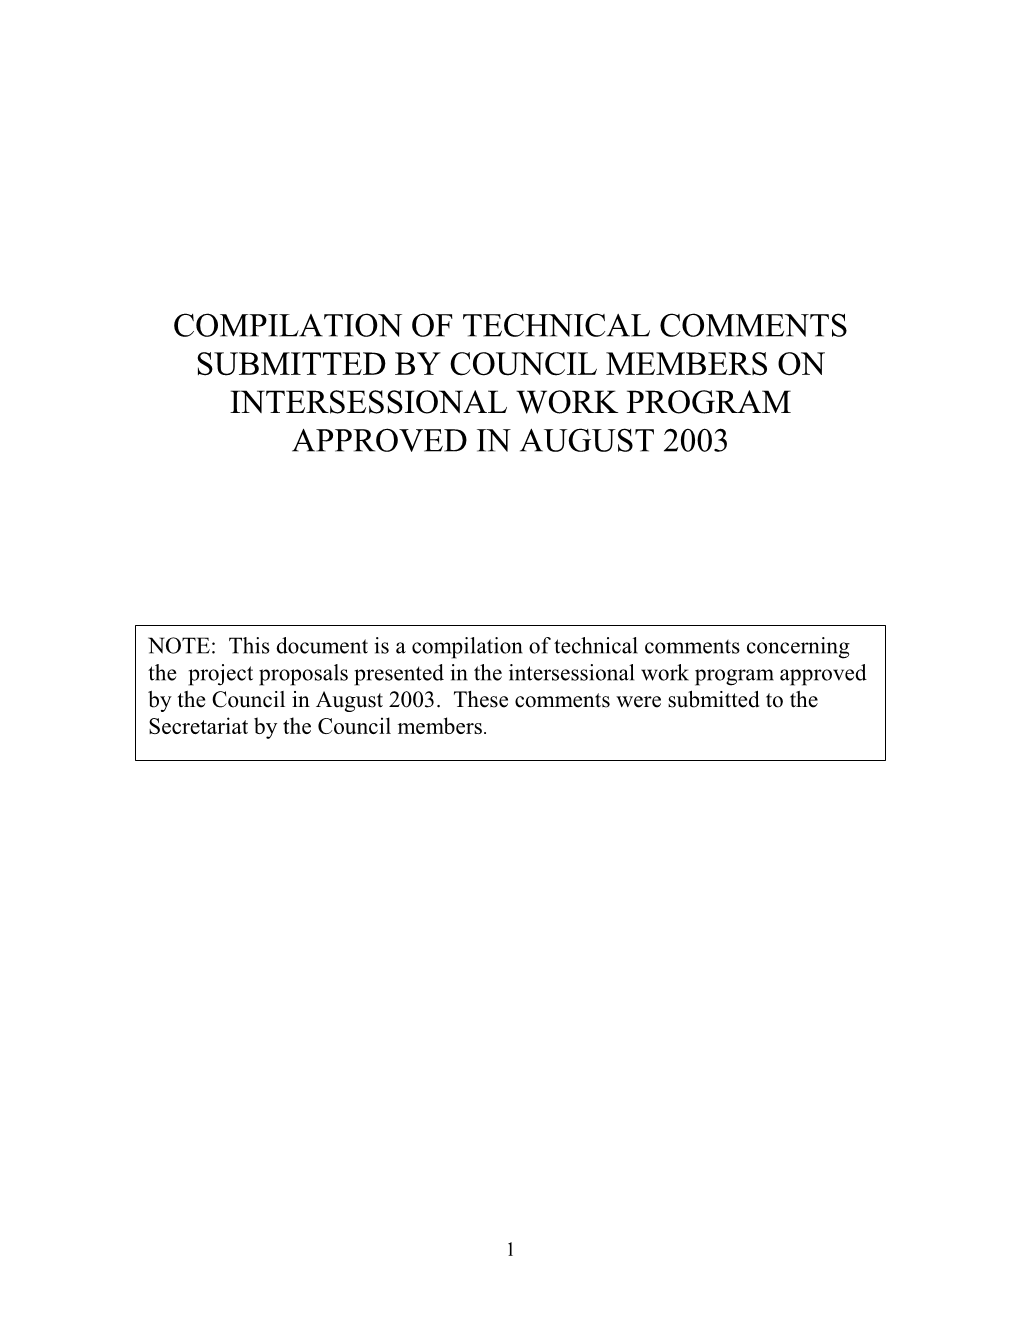 Compilation of Technical Comments Submitted by Council Members on Intersessional Work Program Approved in August 2003